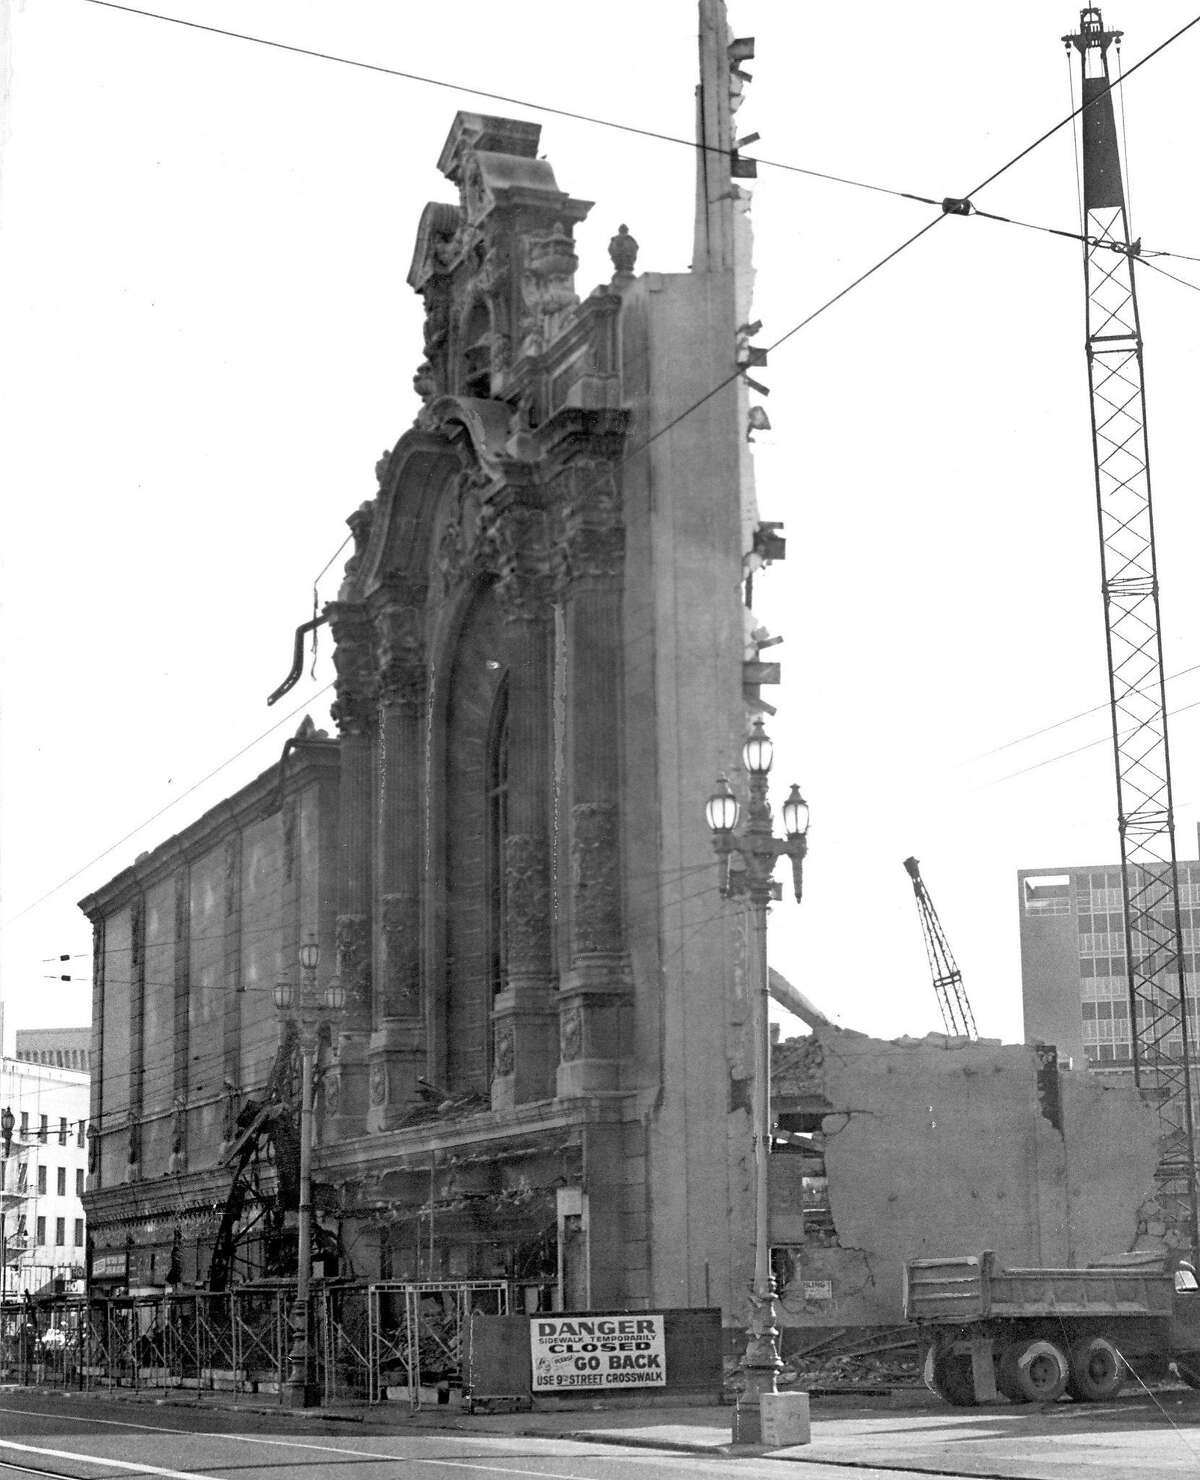 The Fox Theatre on Market Street is torn down to make way for an office building. July 26, 1963.